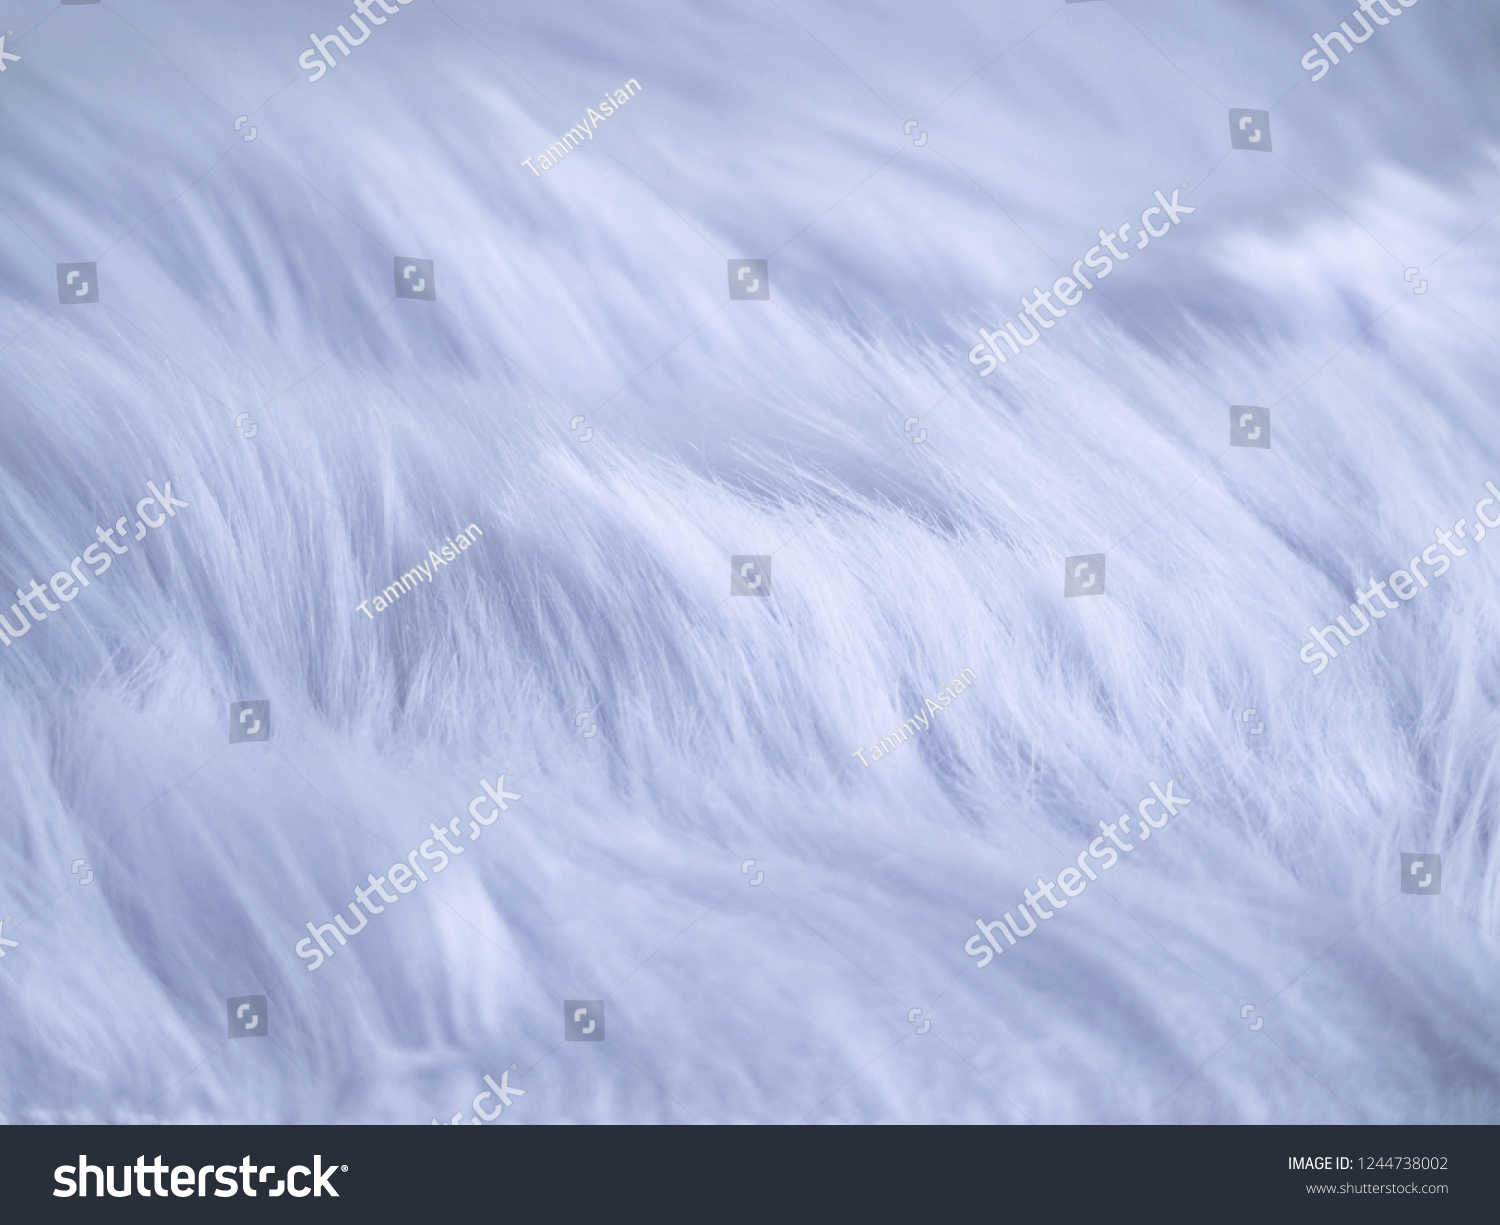 White fabric shaggy fur wool texture as background. #1244738002